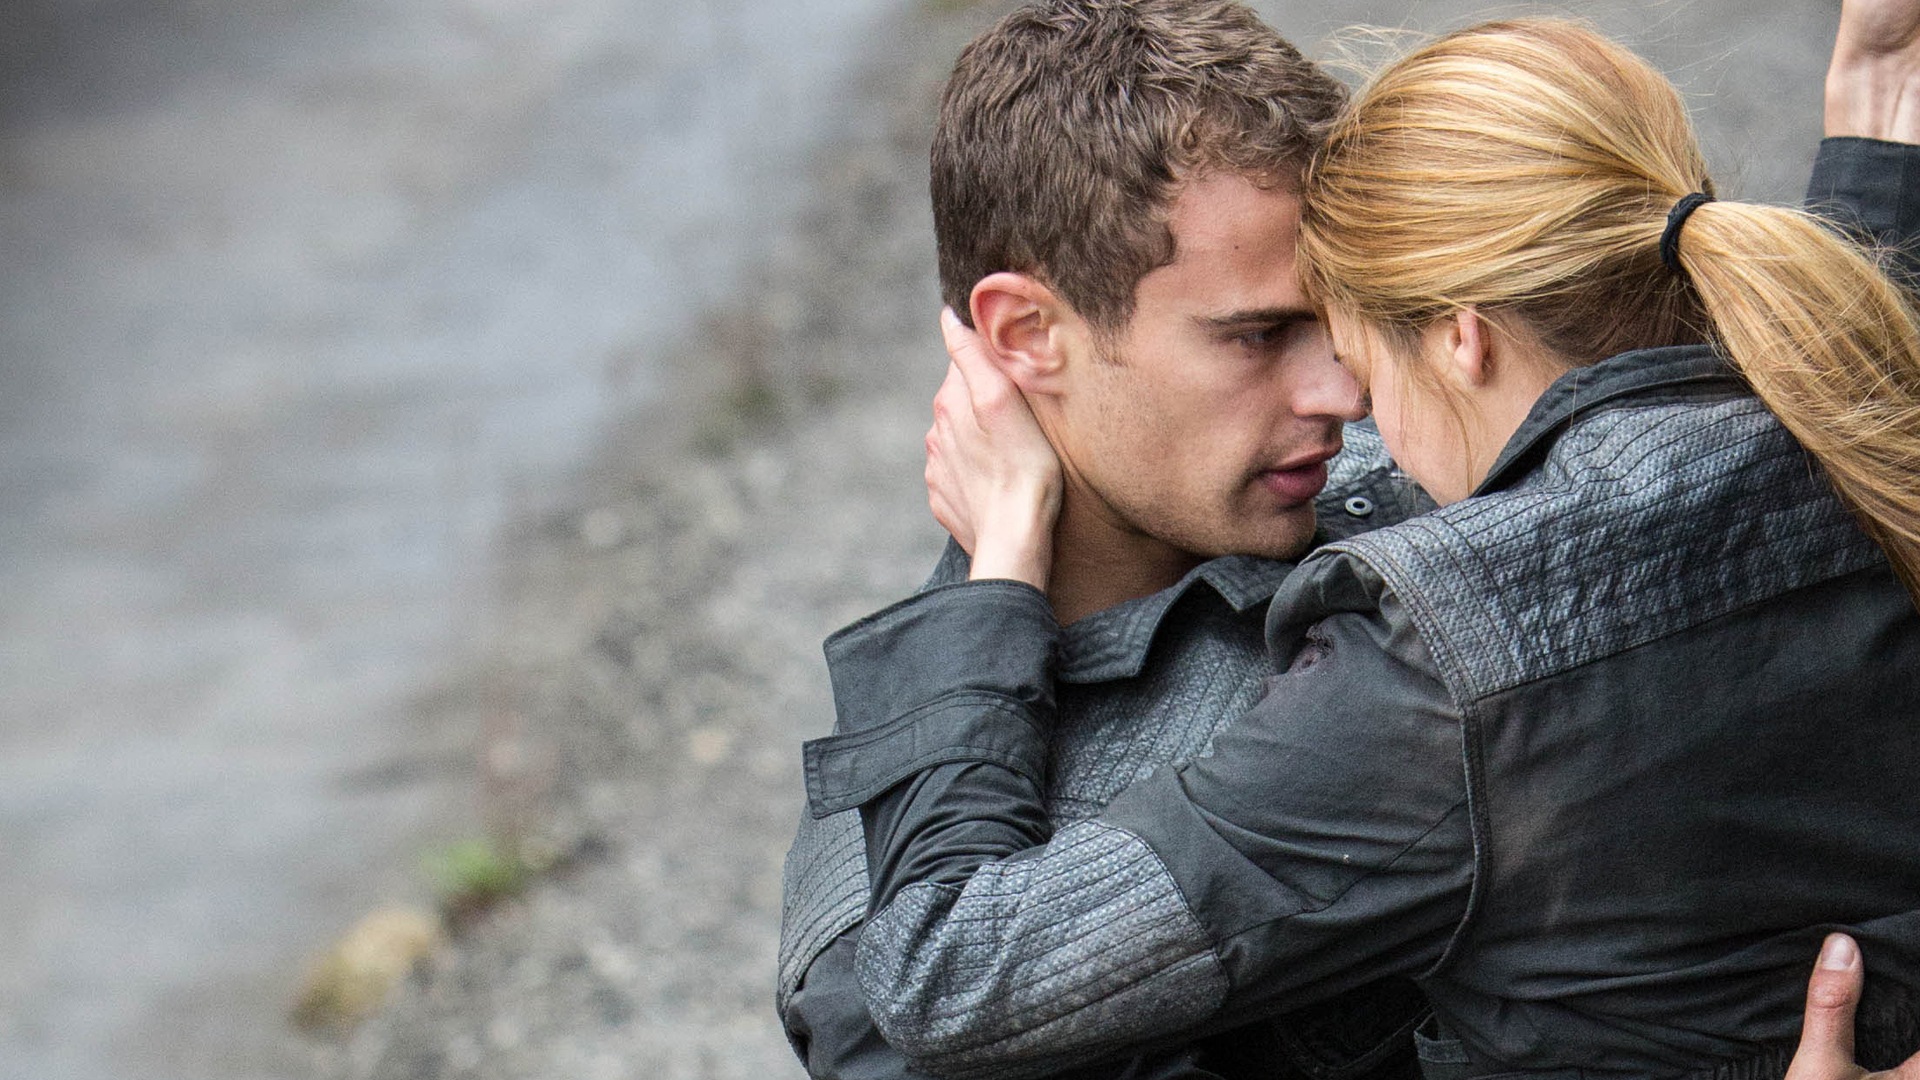 Divergent movie HD wallpapers #12 - 1920x1080